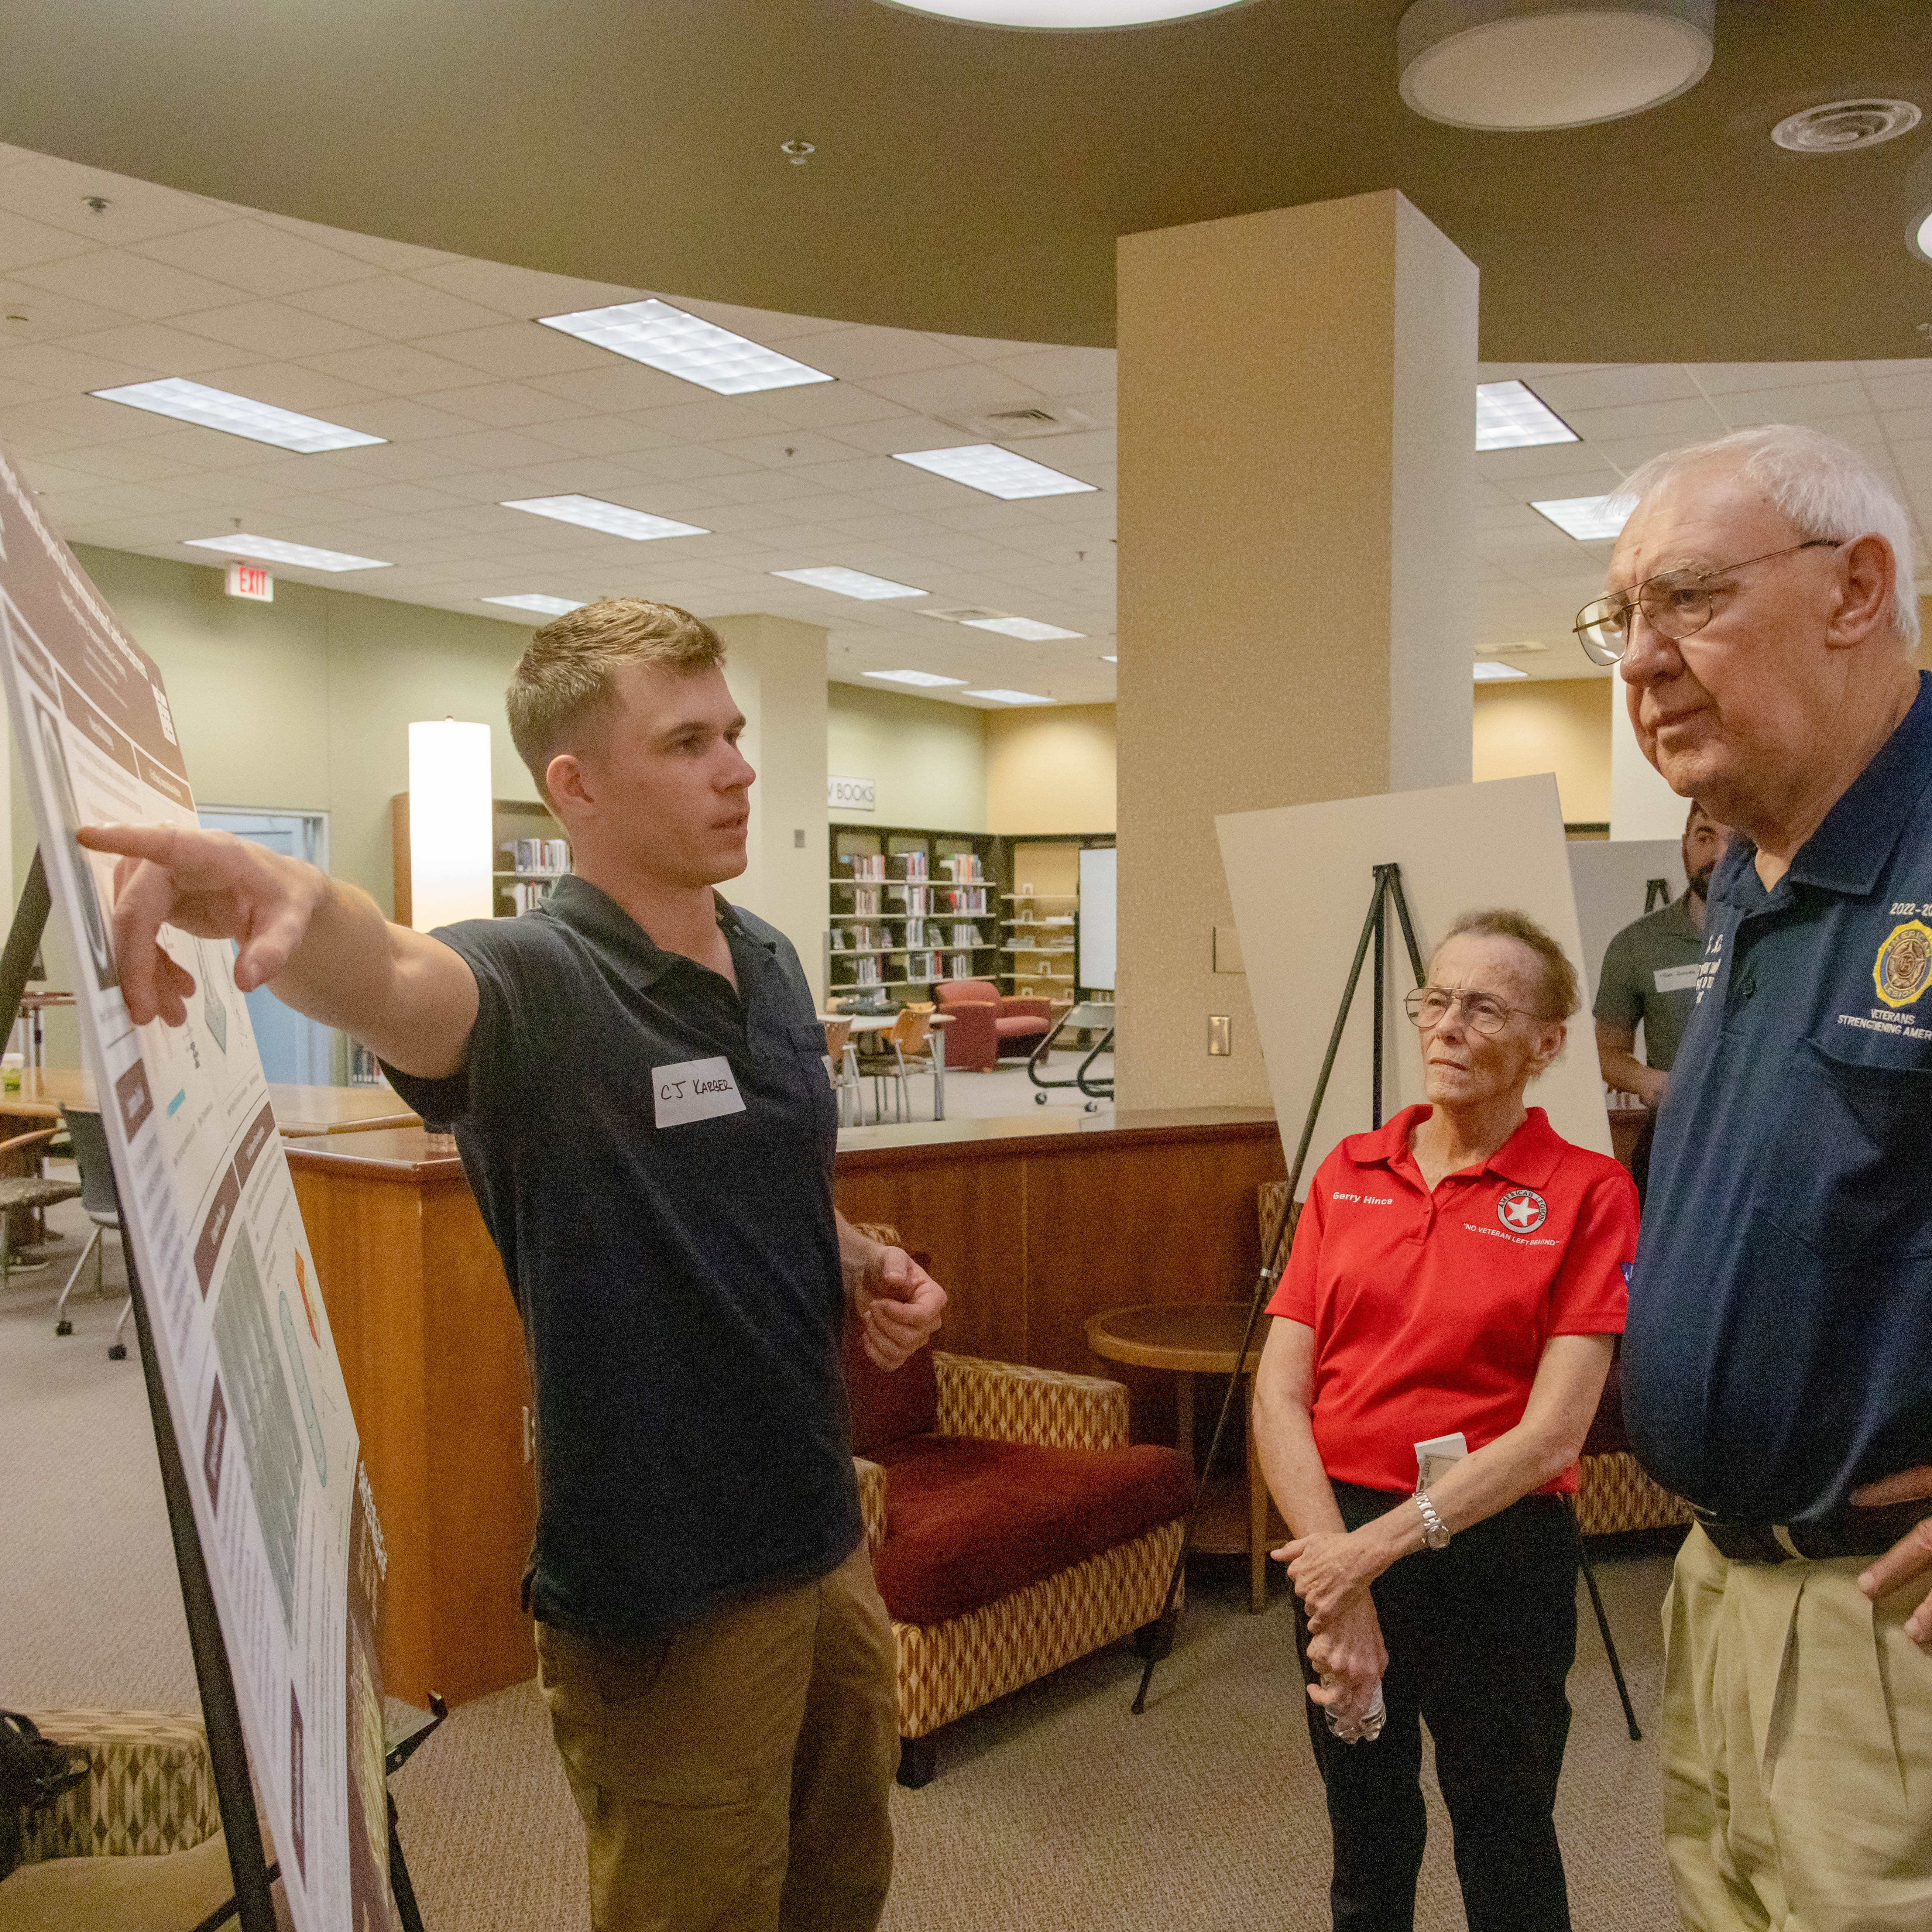 Veteran discussing his research with two Showcase visitors